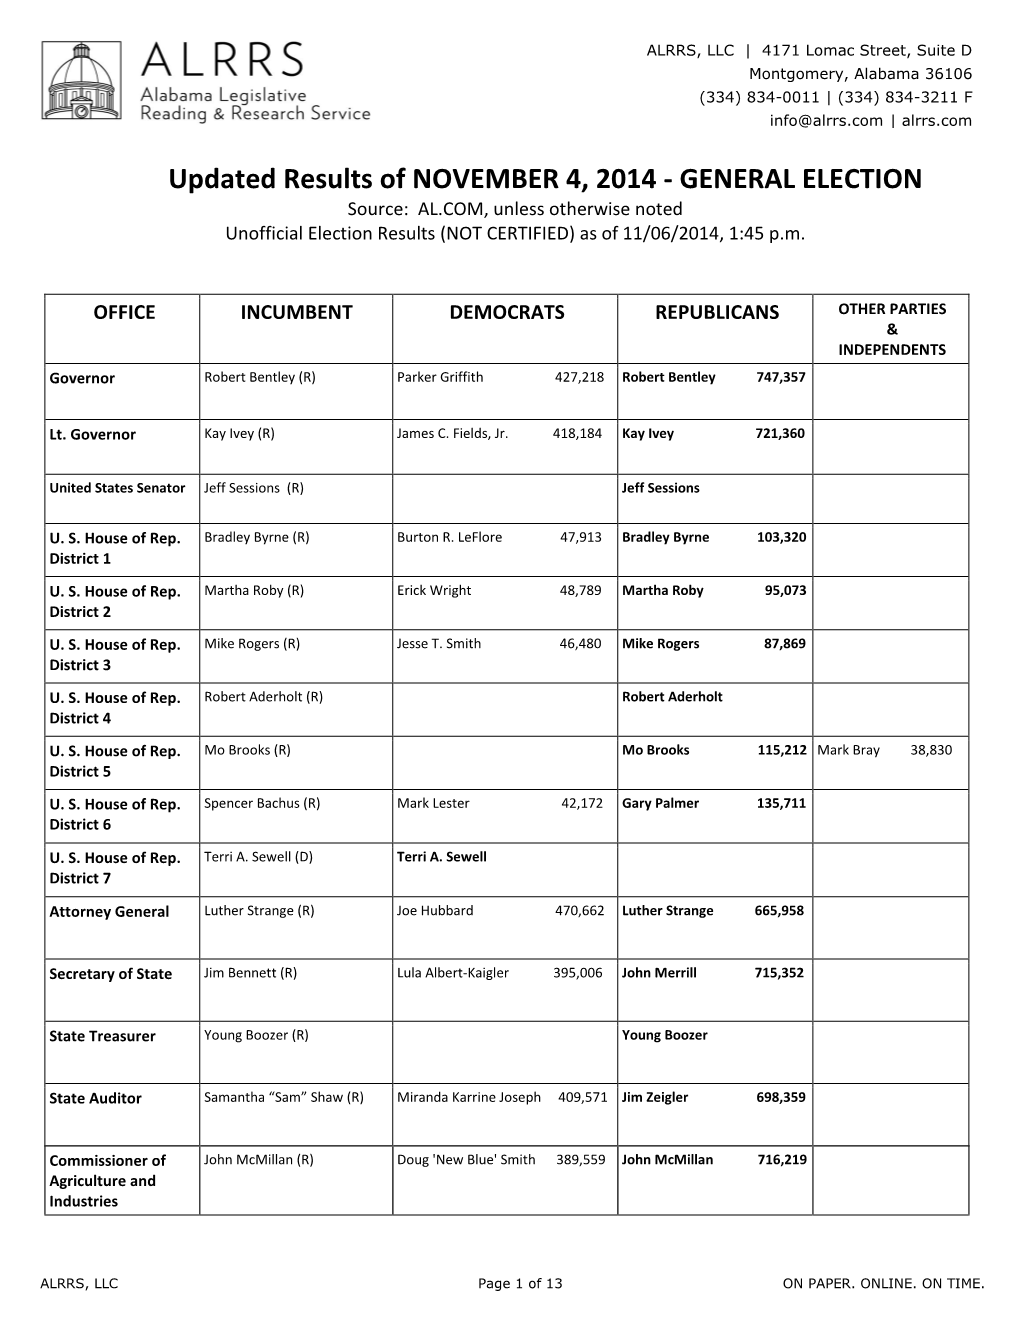 Updated Results of NOVEMBER 4, 2014 - GENERAL ELECTION Source: AL.COM, Unless Otherwise Noted Unofficial Election Results (NOT CERTIFIED) As of 11/06/2014, 1:45 P.M